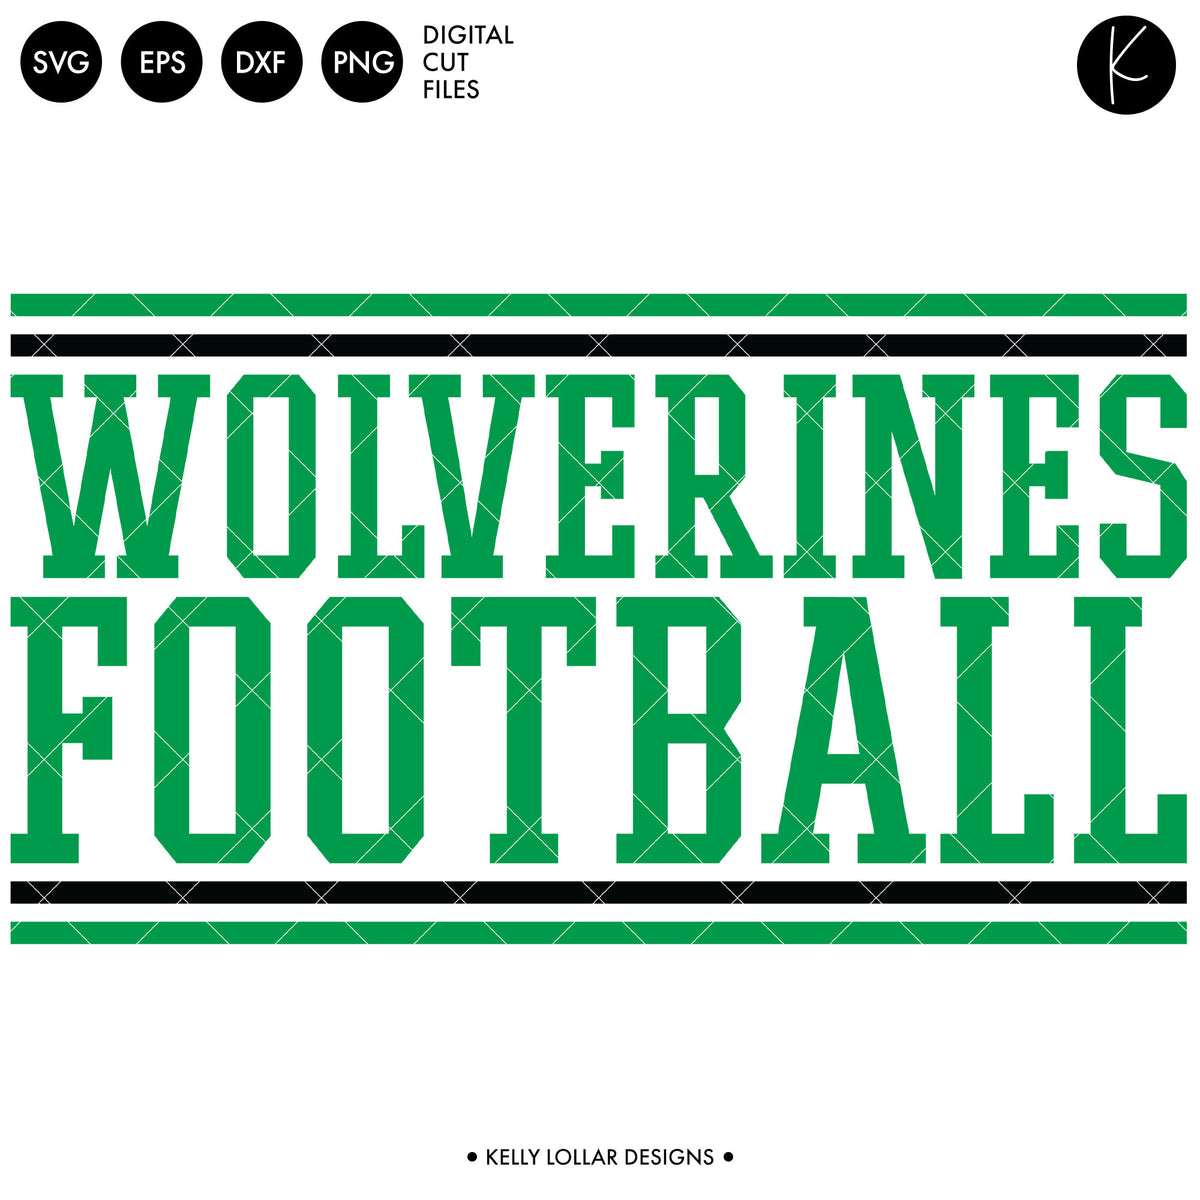 Wolverines Soccer and Football Bundle | SVG DXF EPS PNG Cut Files